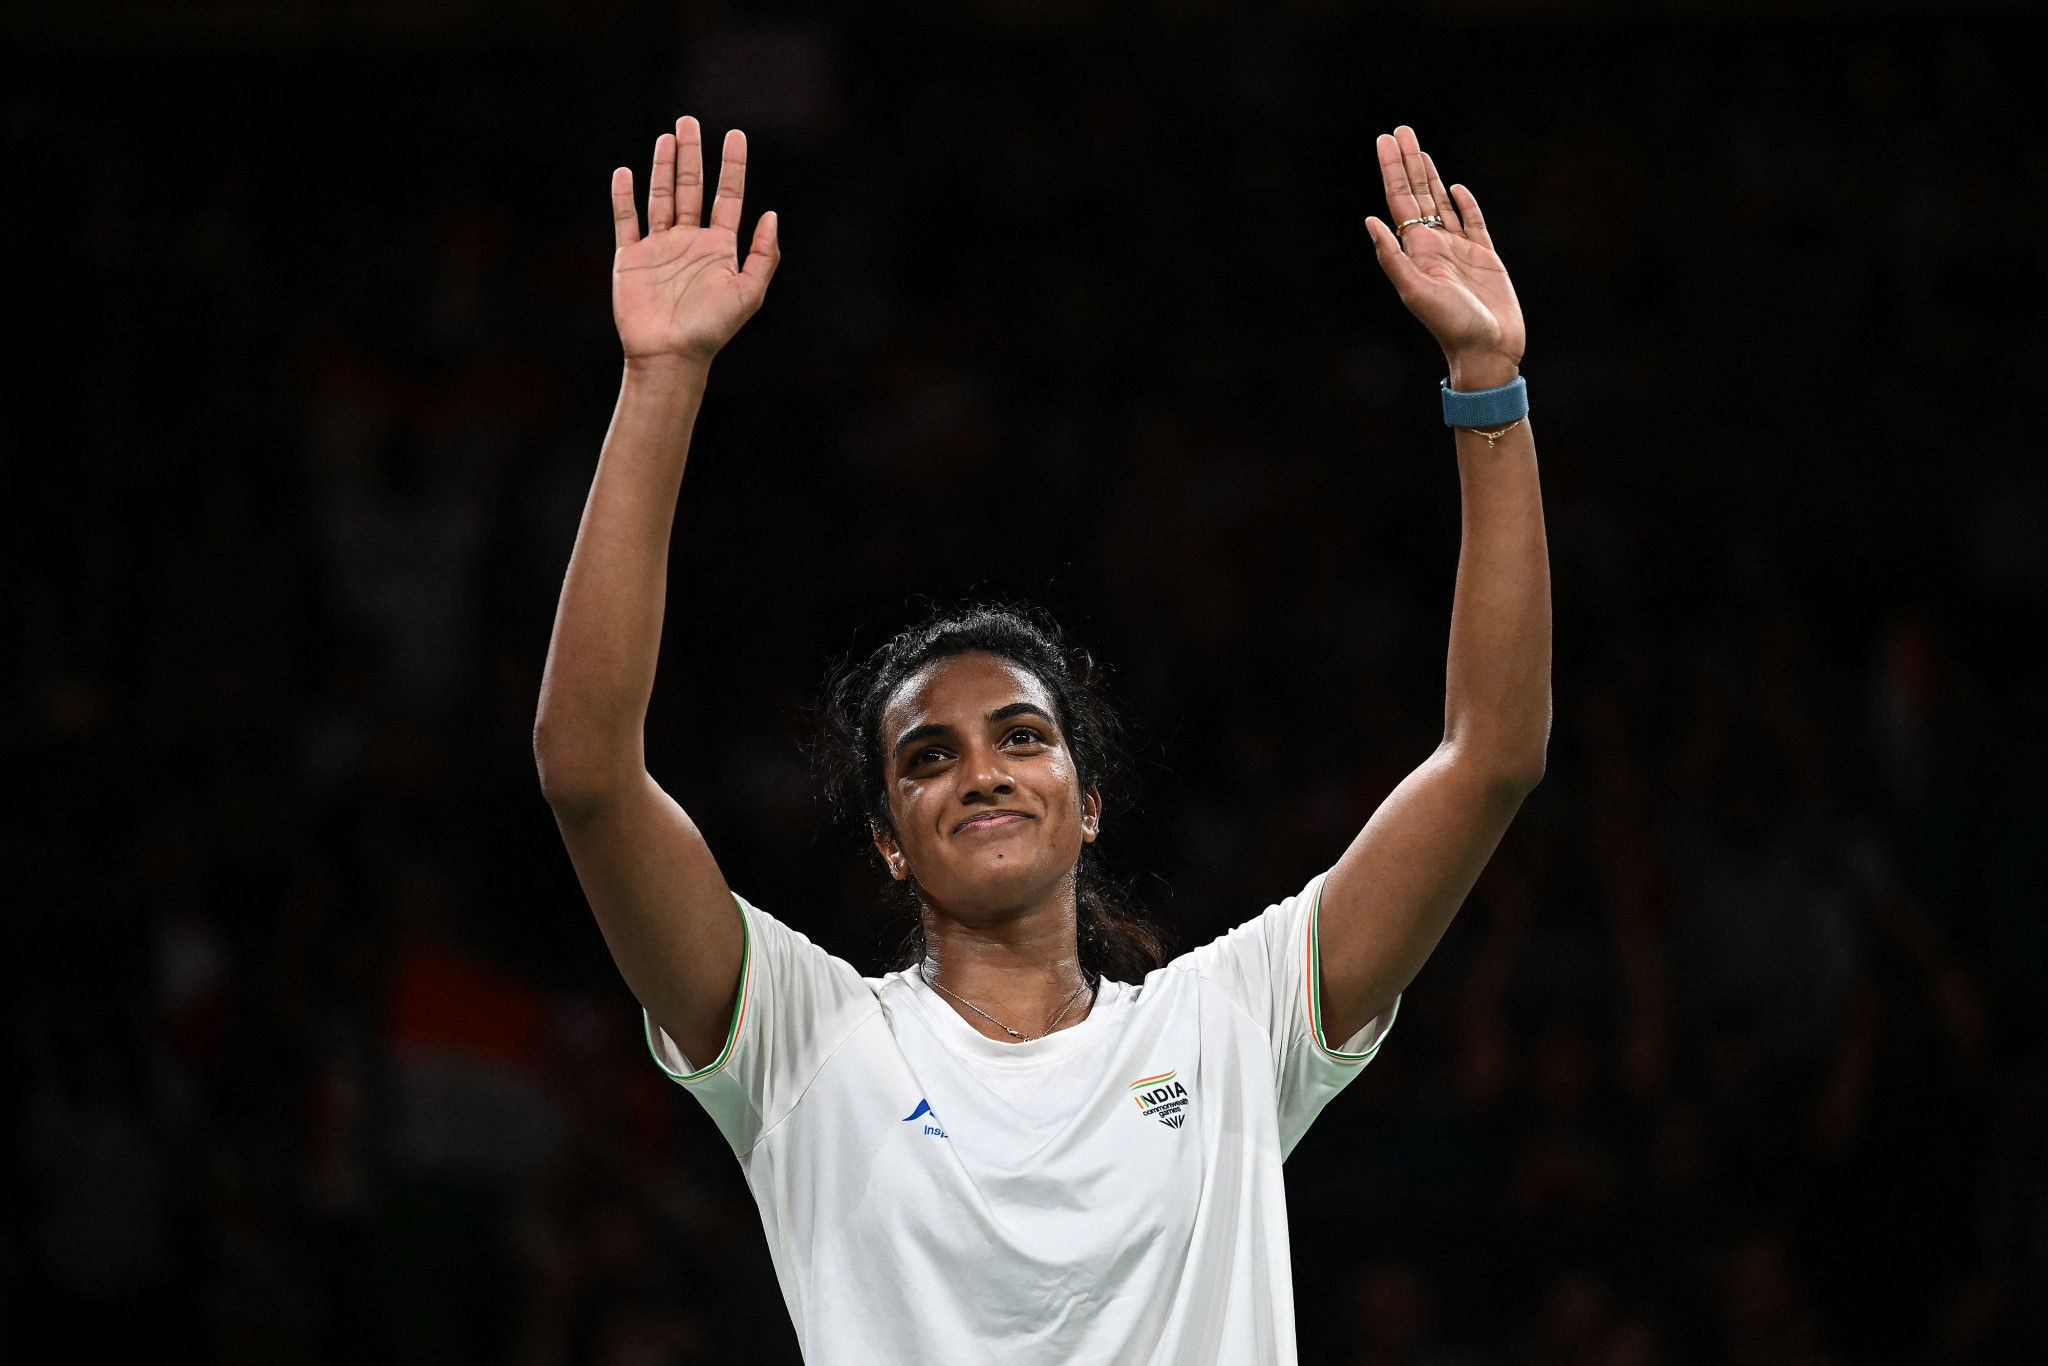 PV Sindhu is among those elected to the Indian Olympic Association Athletes' Commission ©Getty Images